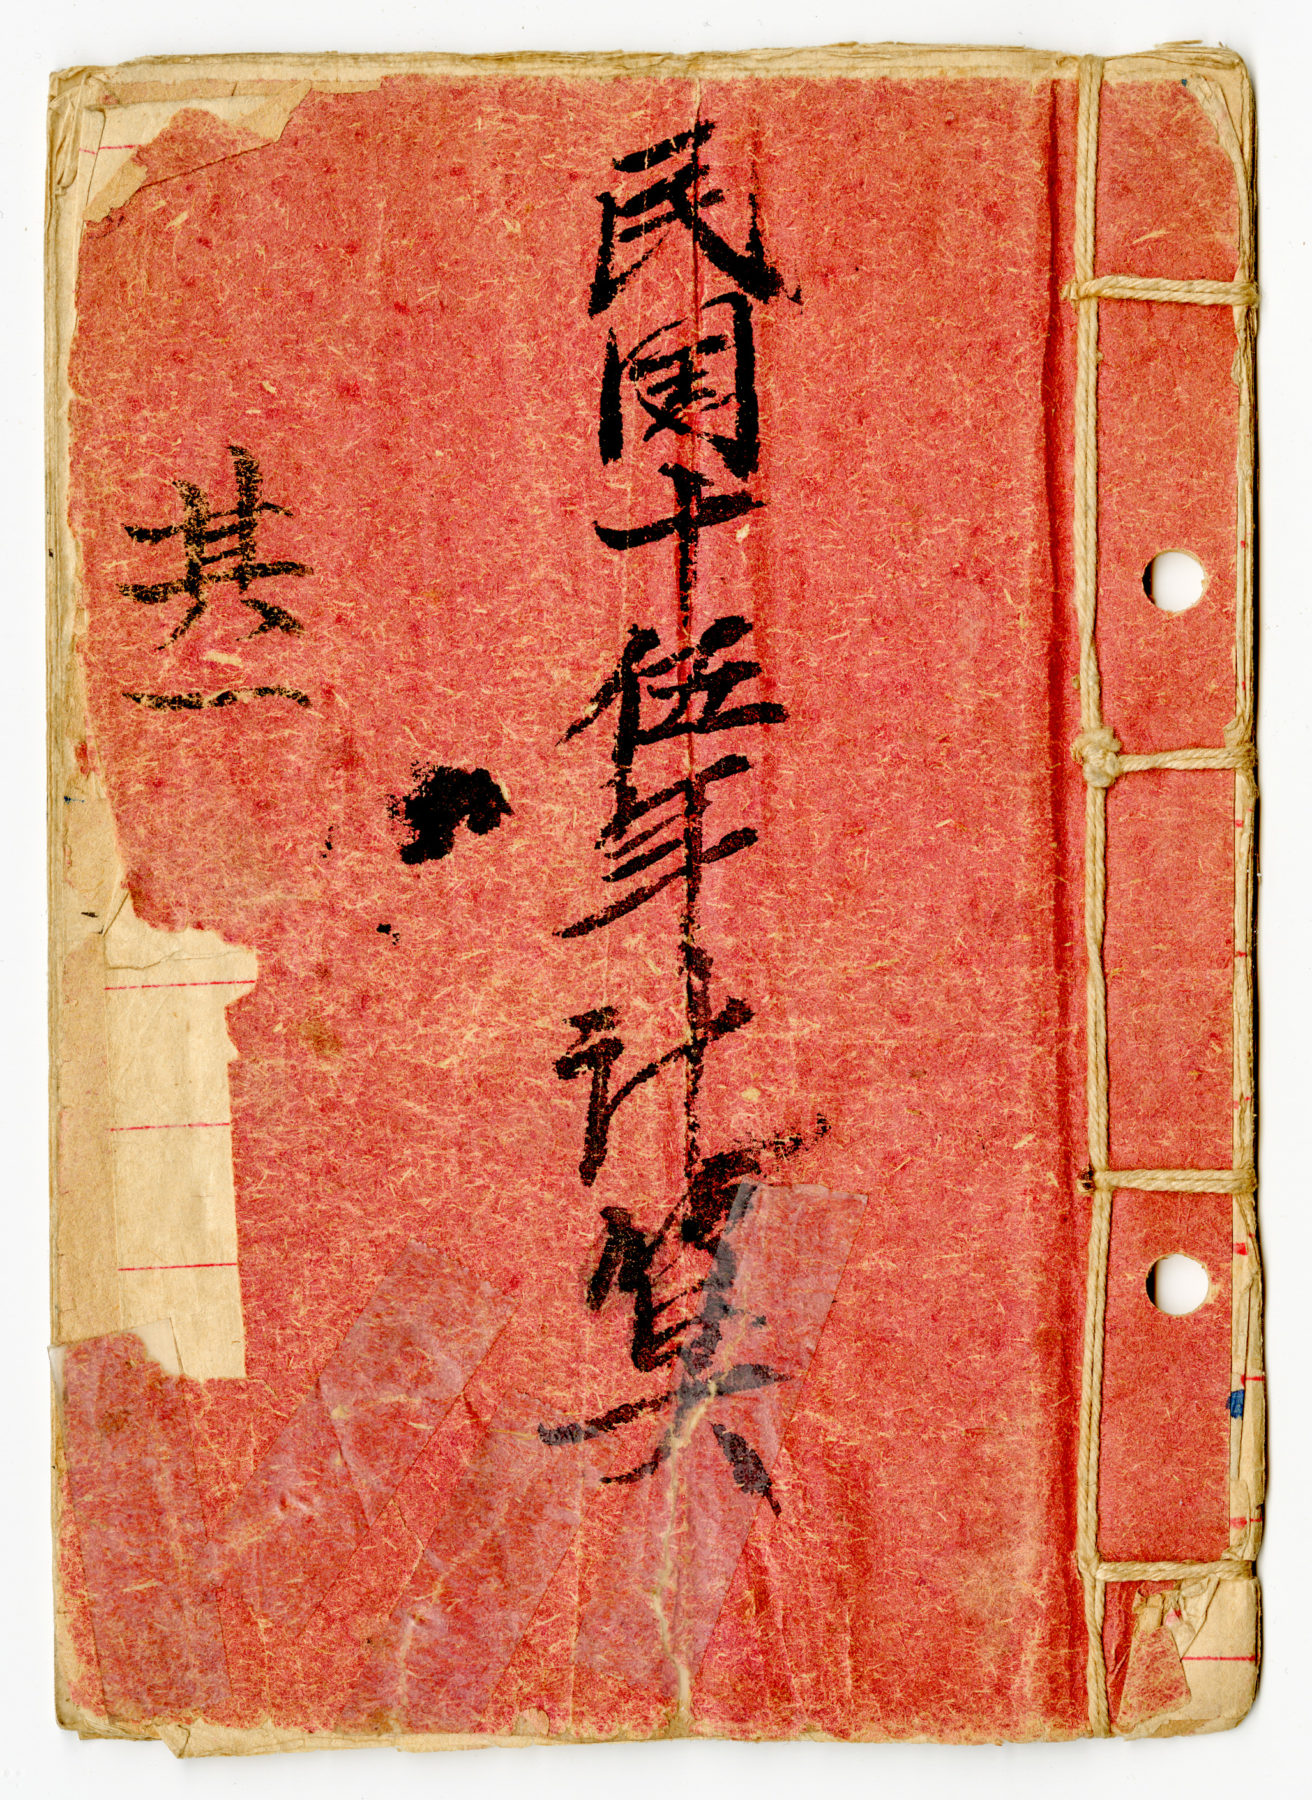 Arthur Lem's coaching book, circa 1926. Courtesy of Warren and Howard Lem. Museum of Chinese in America (MOCA) Collection.